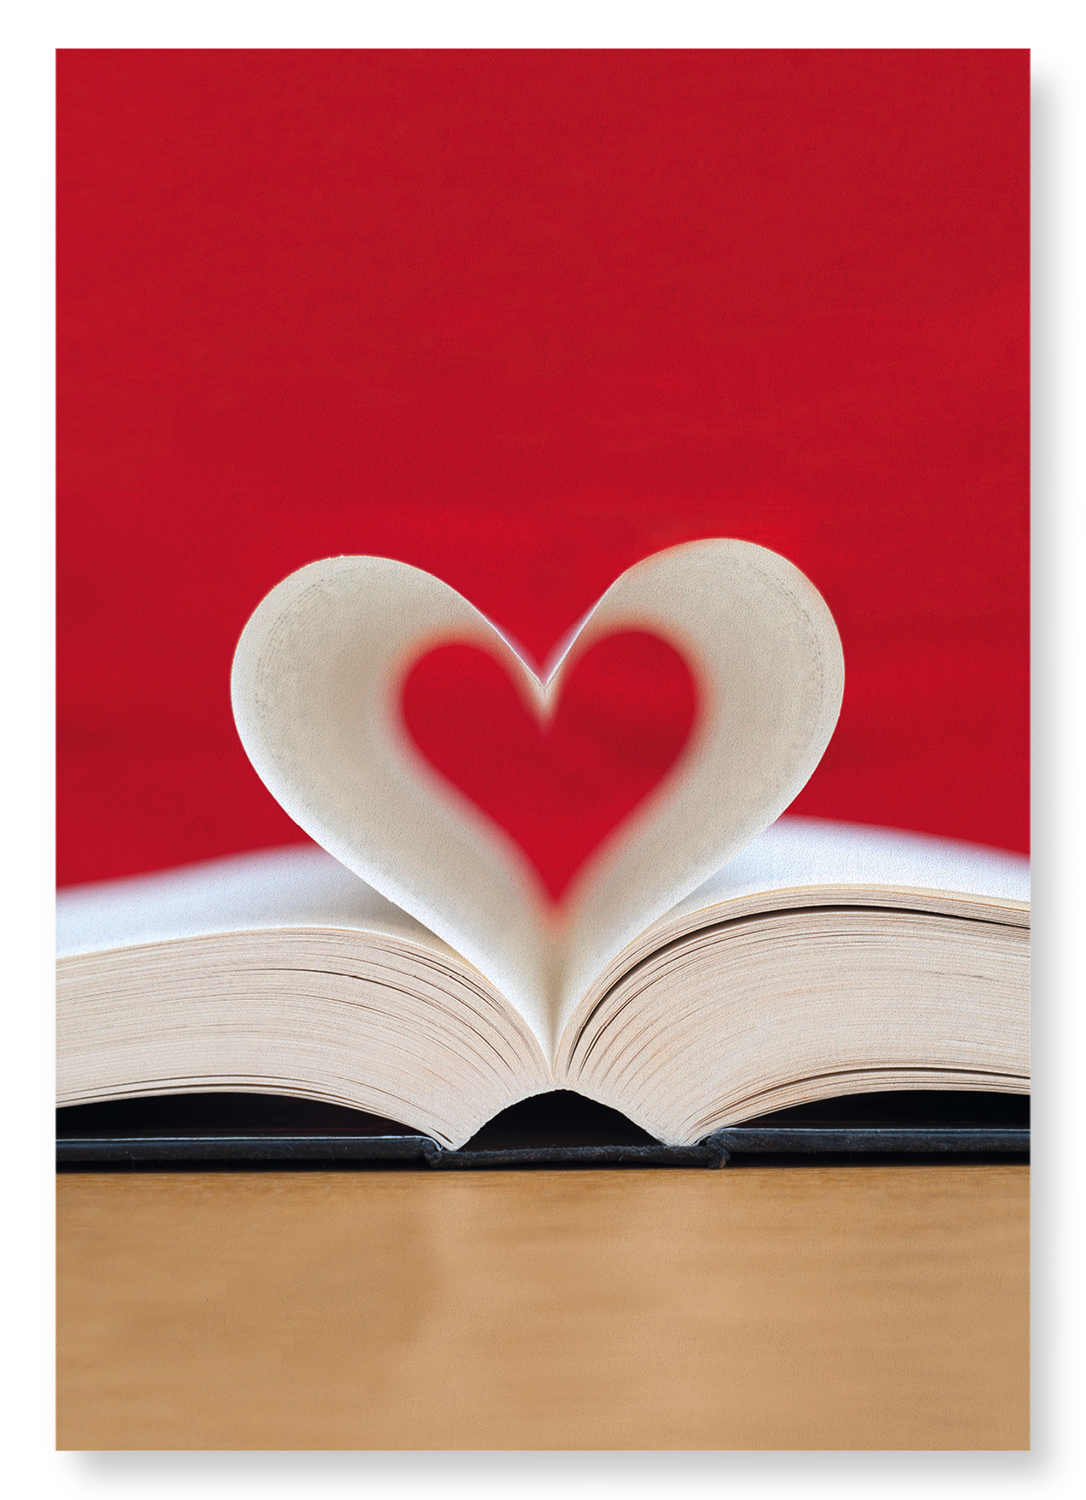 PAGE OF HEART: Photo Art print